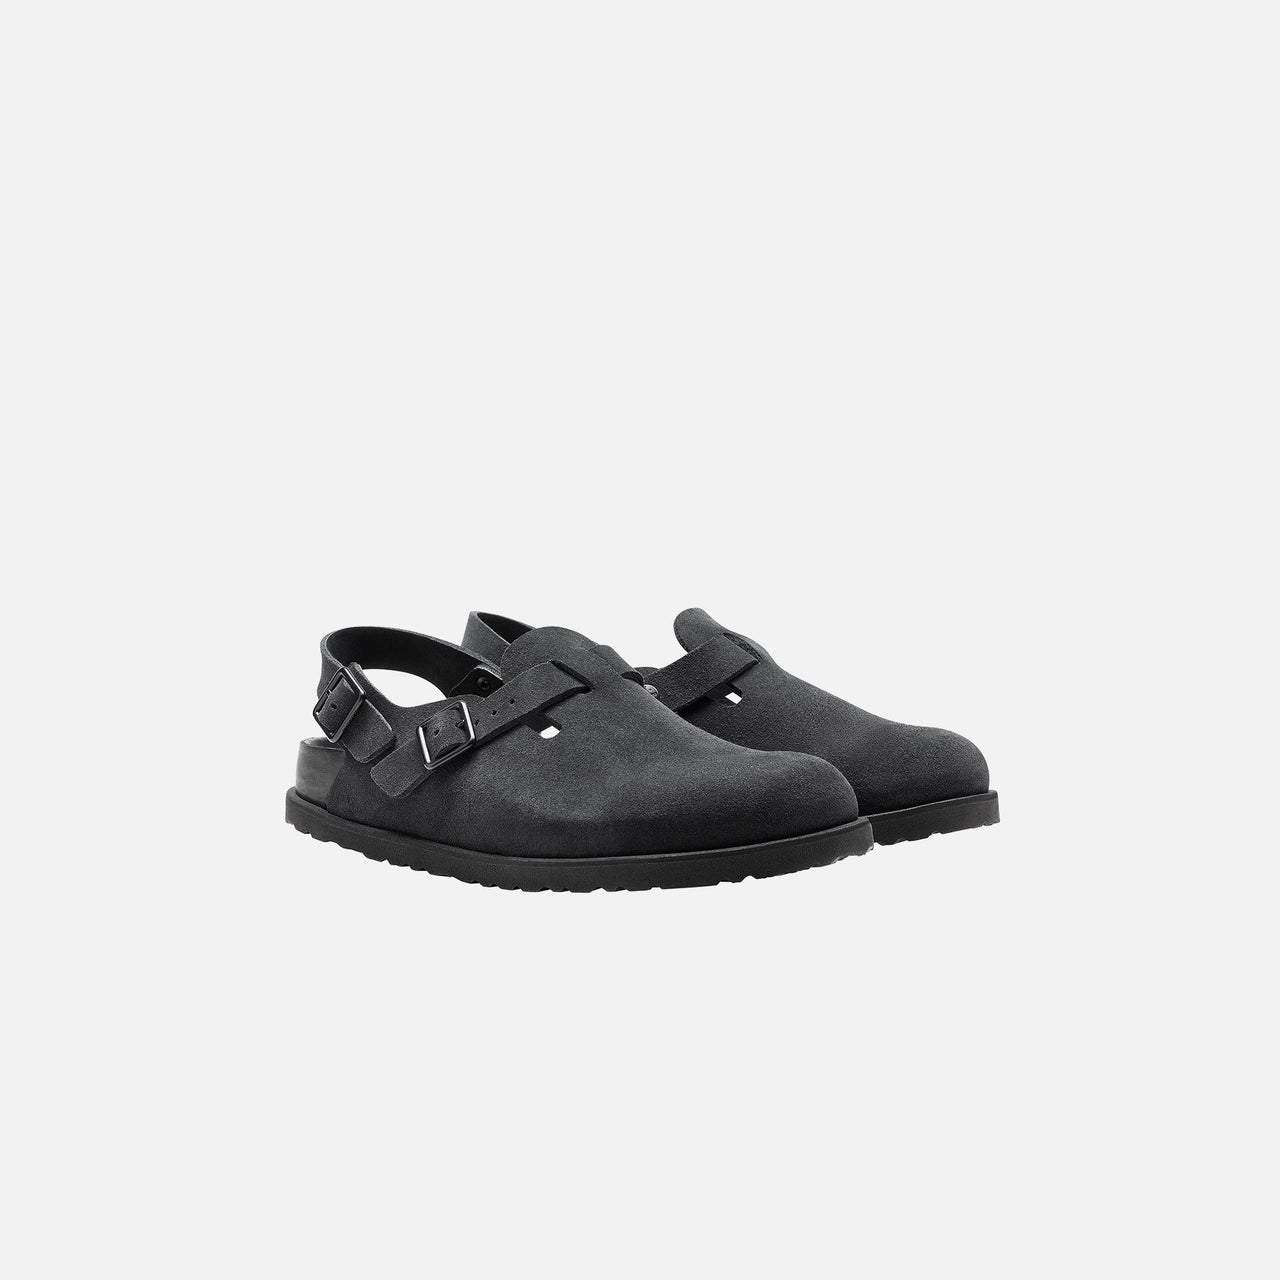 Birkenstock 1774 Tokio Suede Leather Black - Side view showcasing the sleek black color and comfortable fit